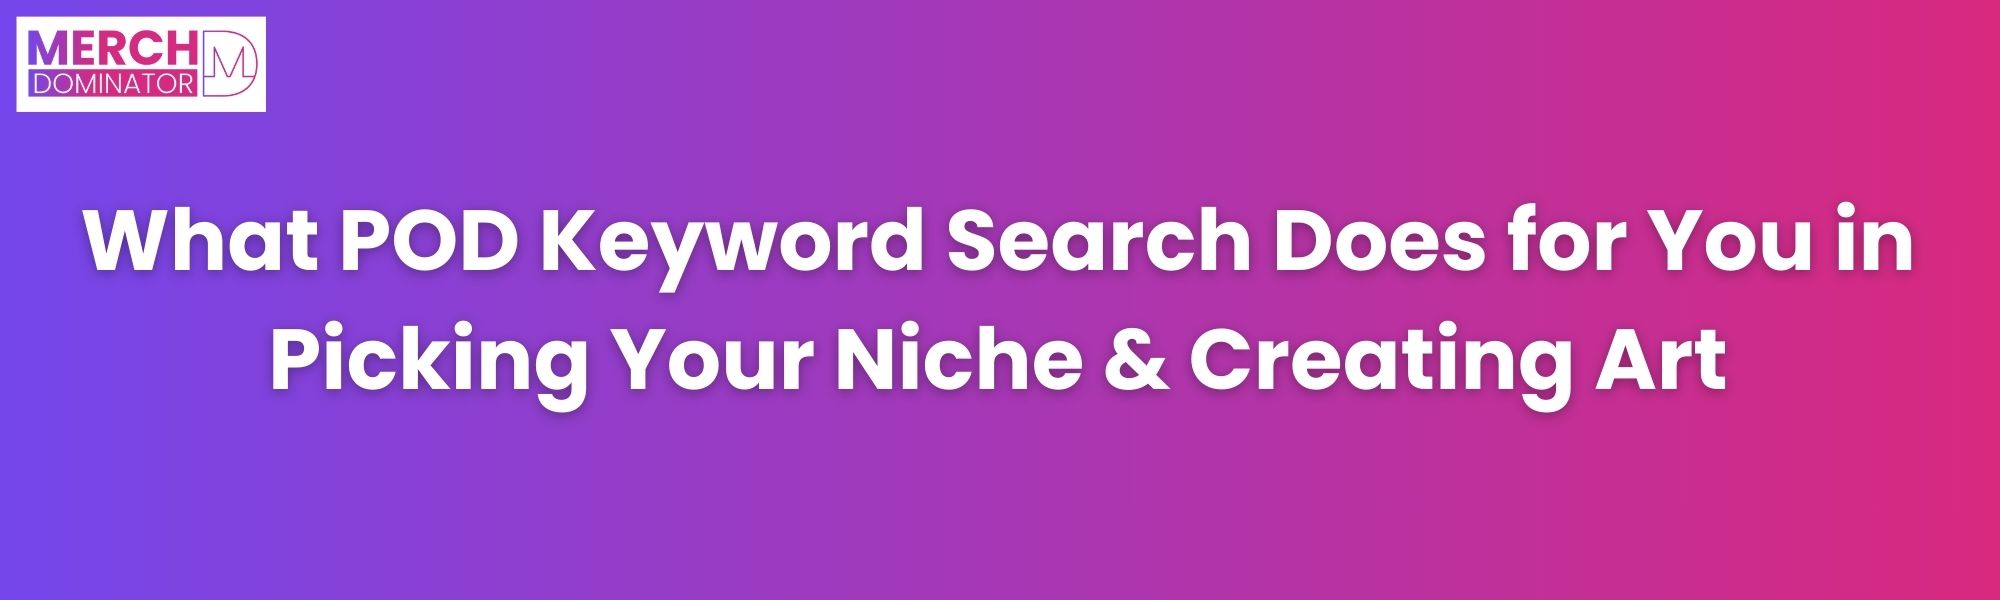 How POD Keyword Search Helps in Picking Niche & Creating Art